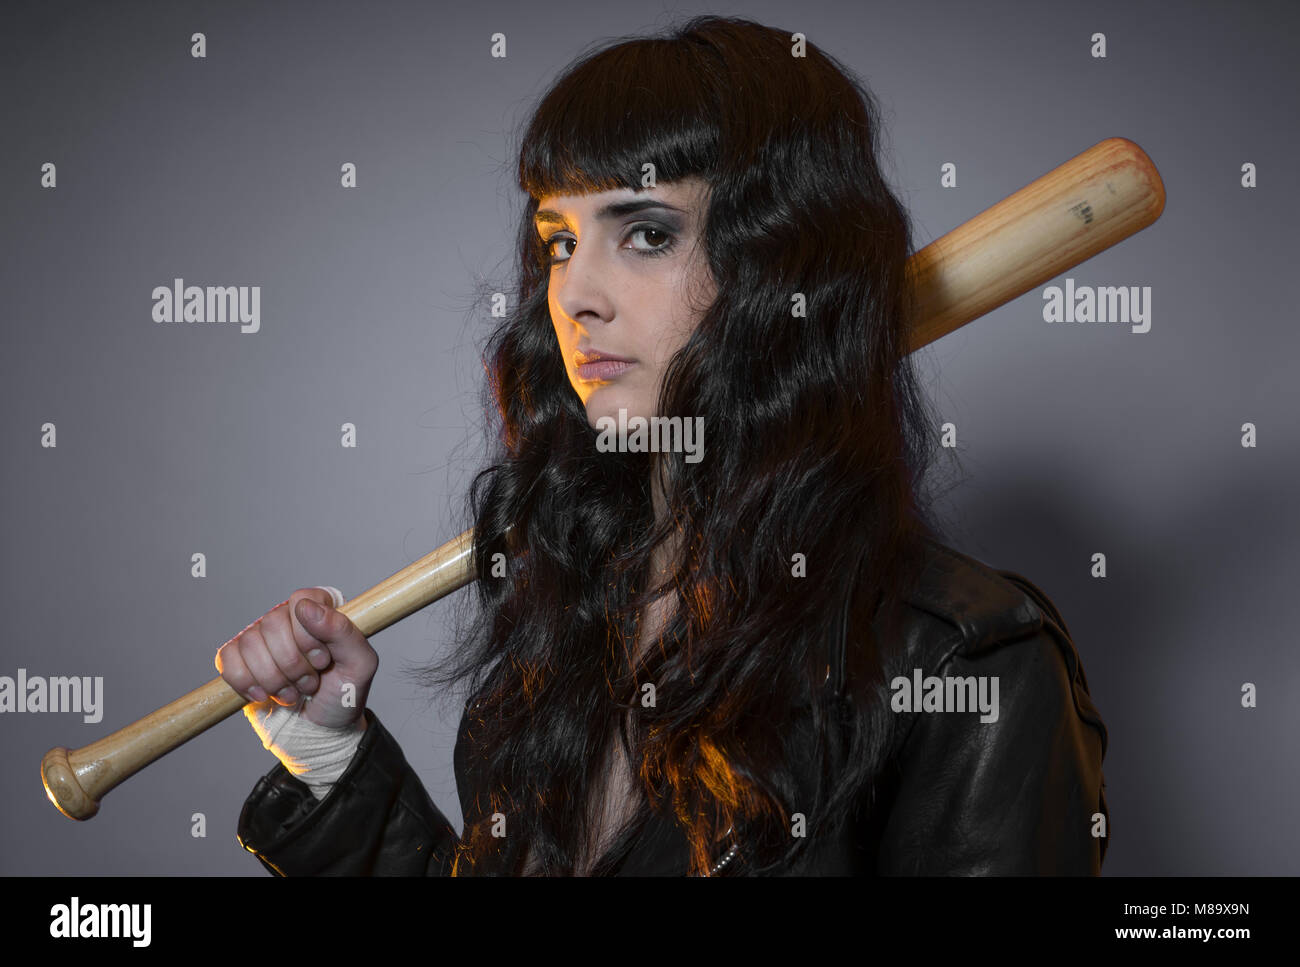 adolescence and delinquency, brunette woman in leather jacket and baseball bat with challenging aptitude Stock Photo